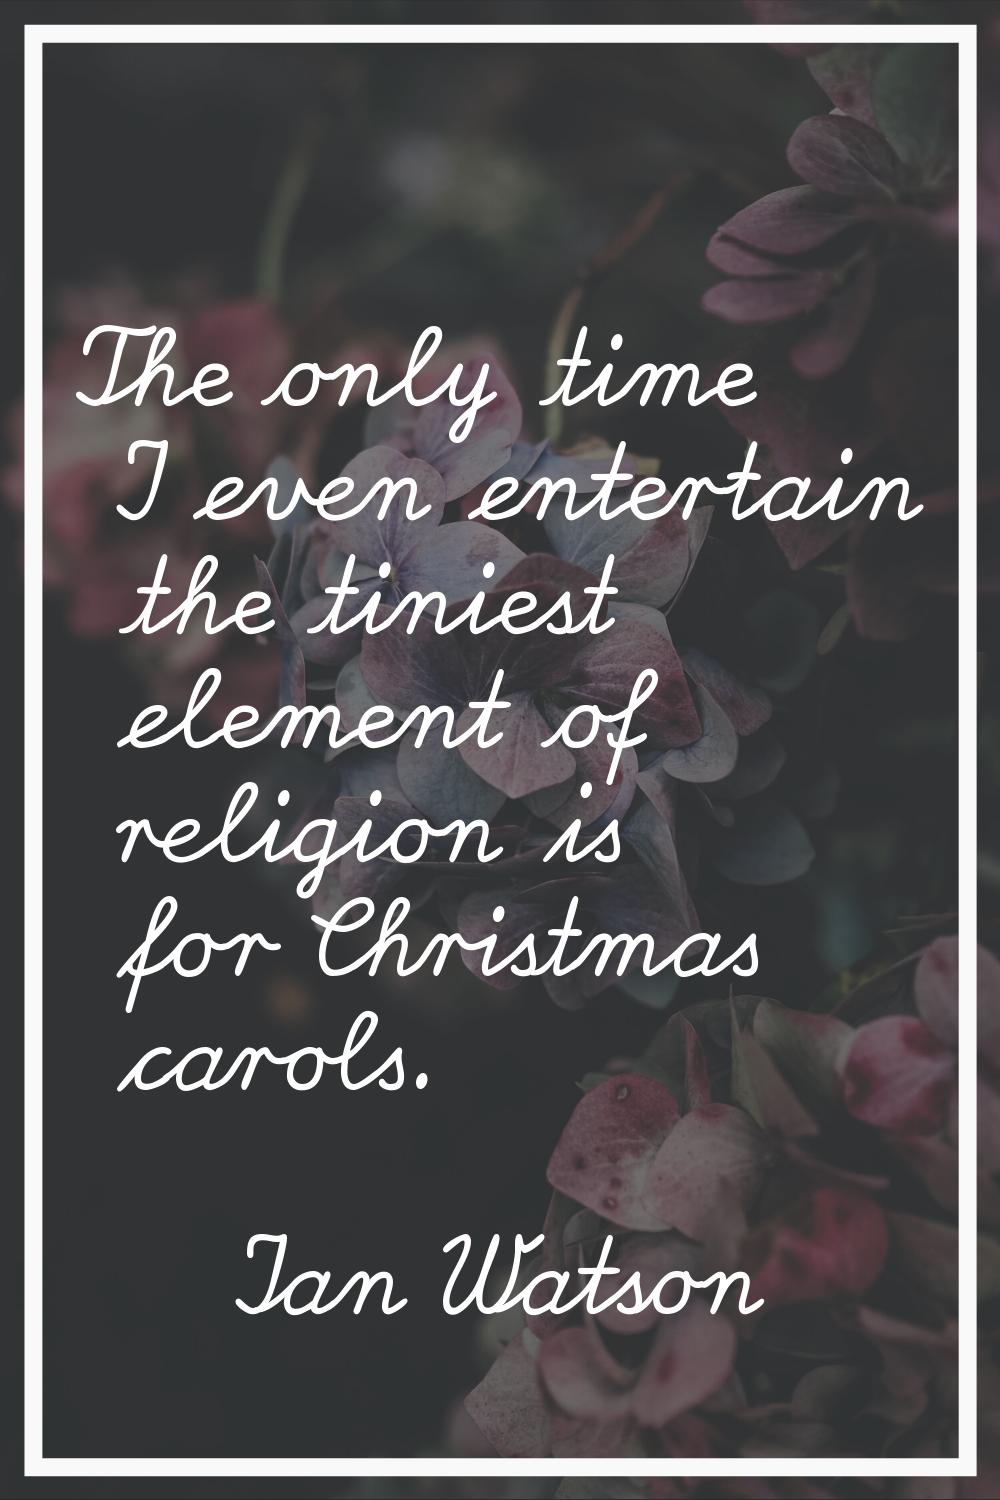 The only time I even entertain the tiniest element of religion is for Christmas carols.